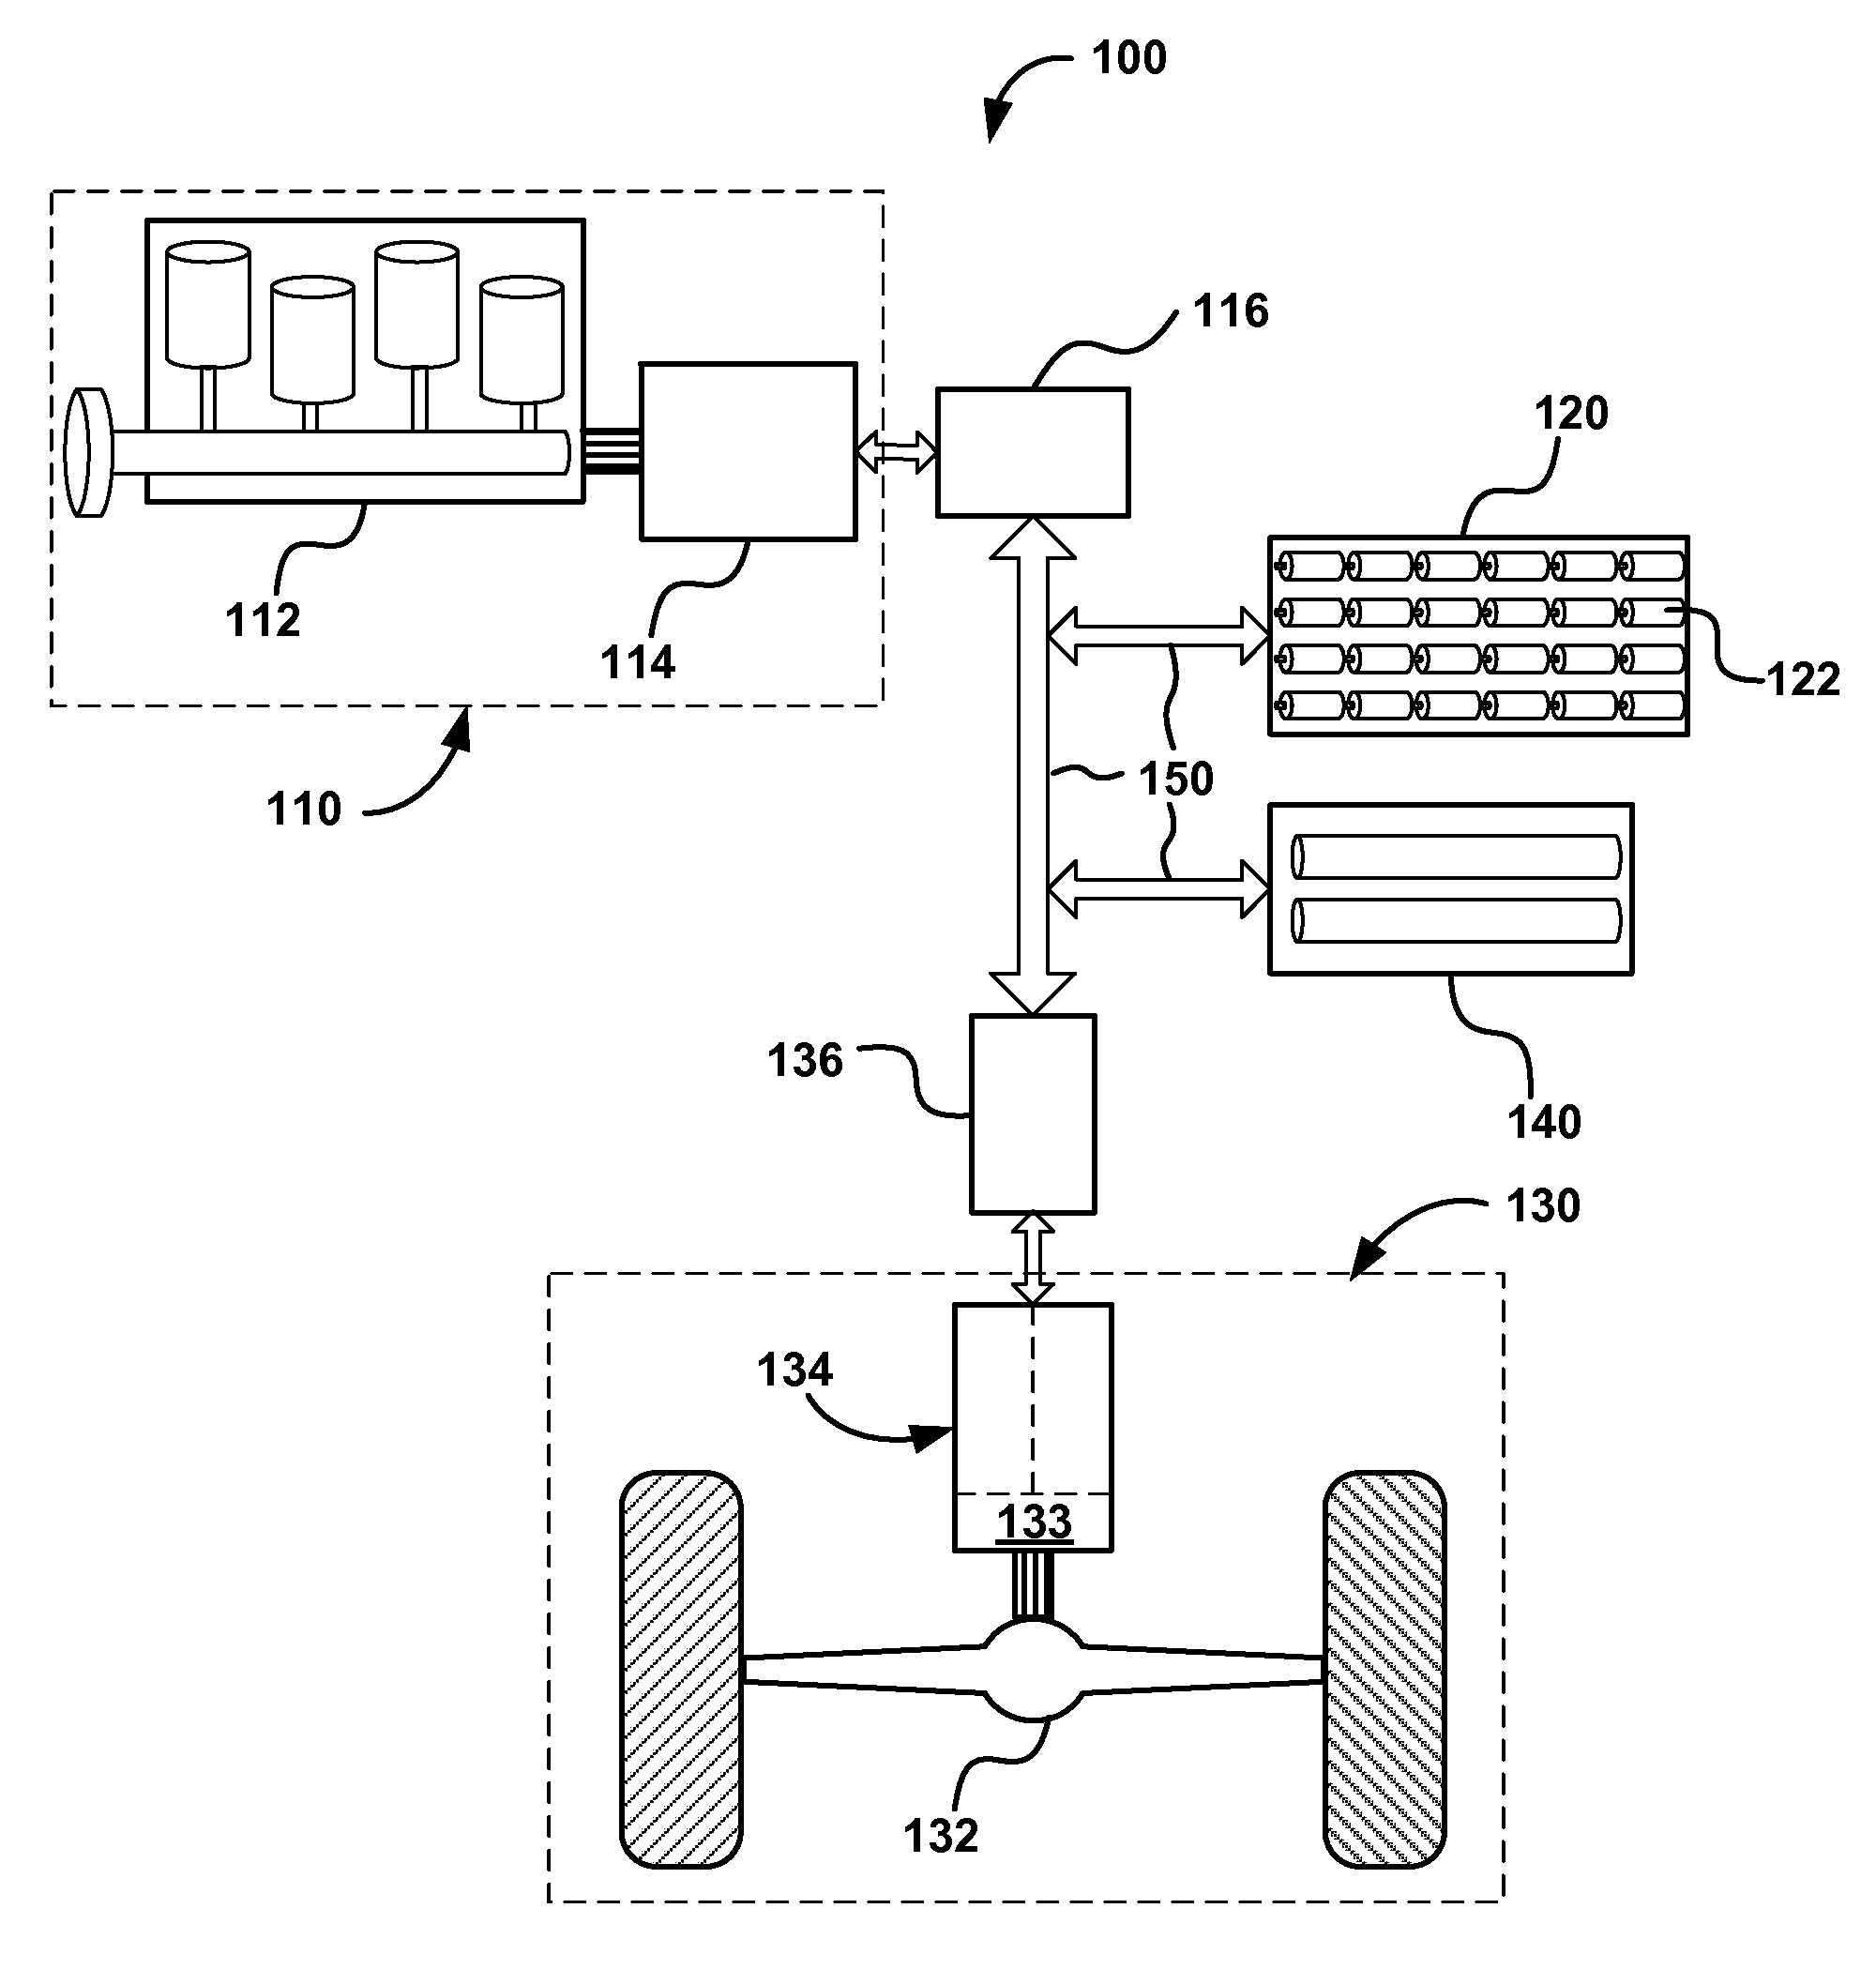 Hybrid electric vehicle system and method for initiating and operating a hybrid vehicle in a limited operation mode